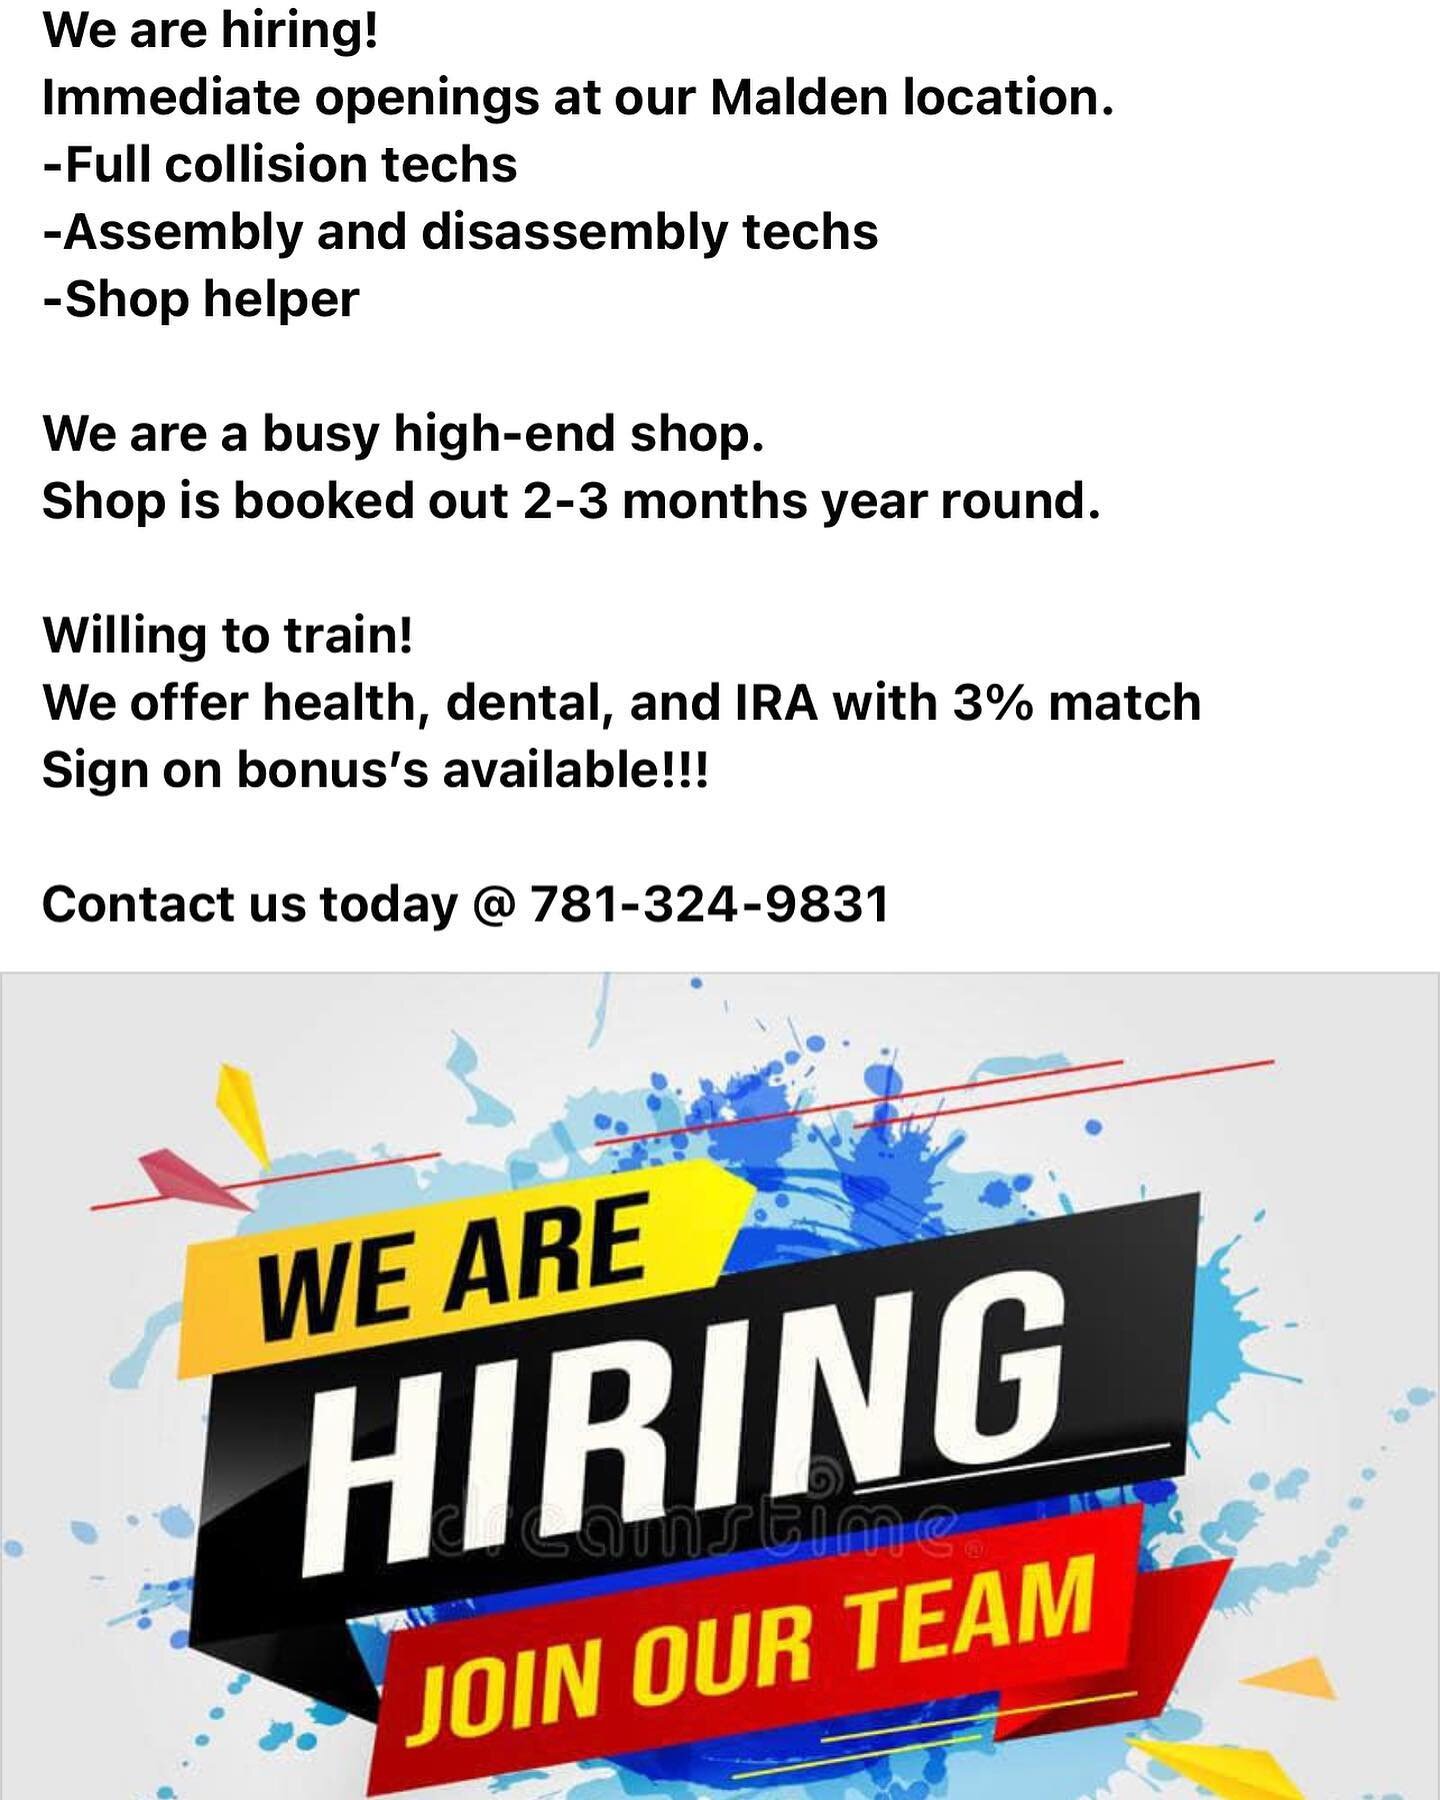 Openings available now! 
Come work for one of the fastest growing shops in the Boston area! 
Relocation options available for out of state applicants!!!
#boston #jobs #collision #collisonrepair #relocate